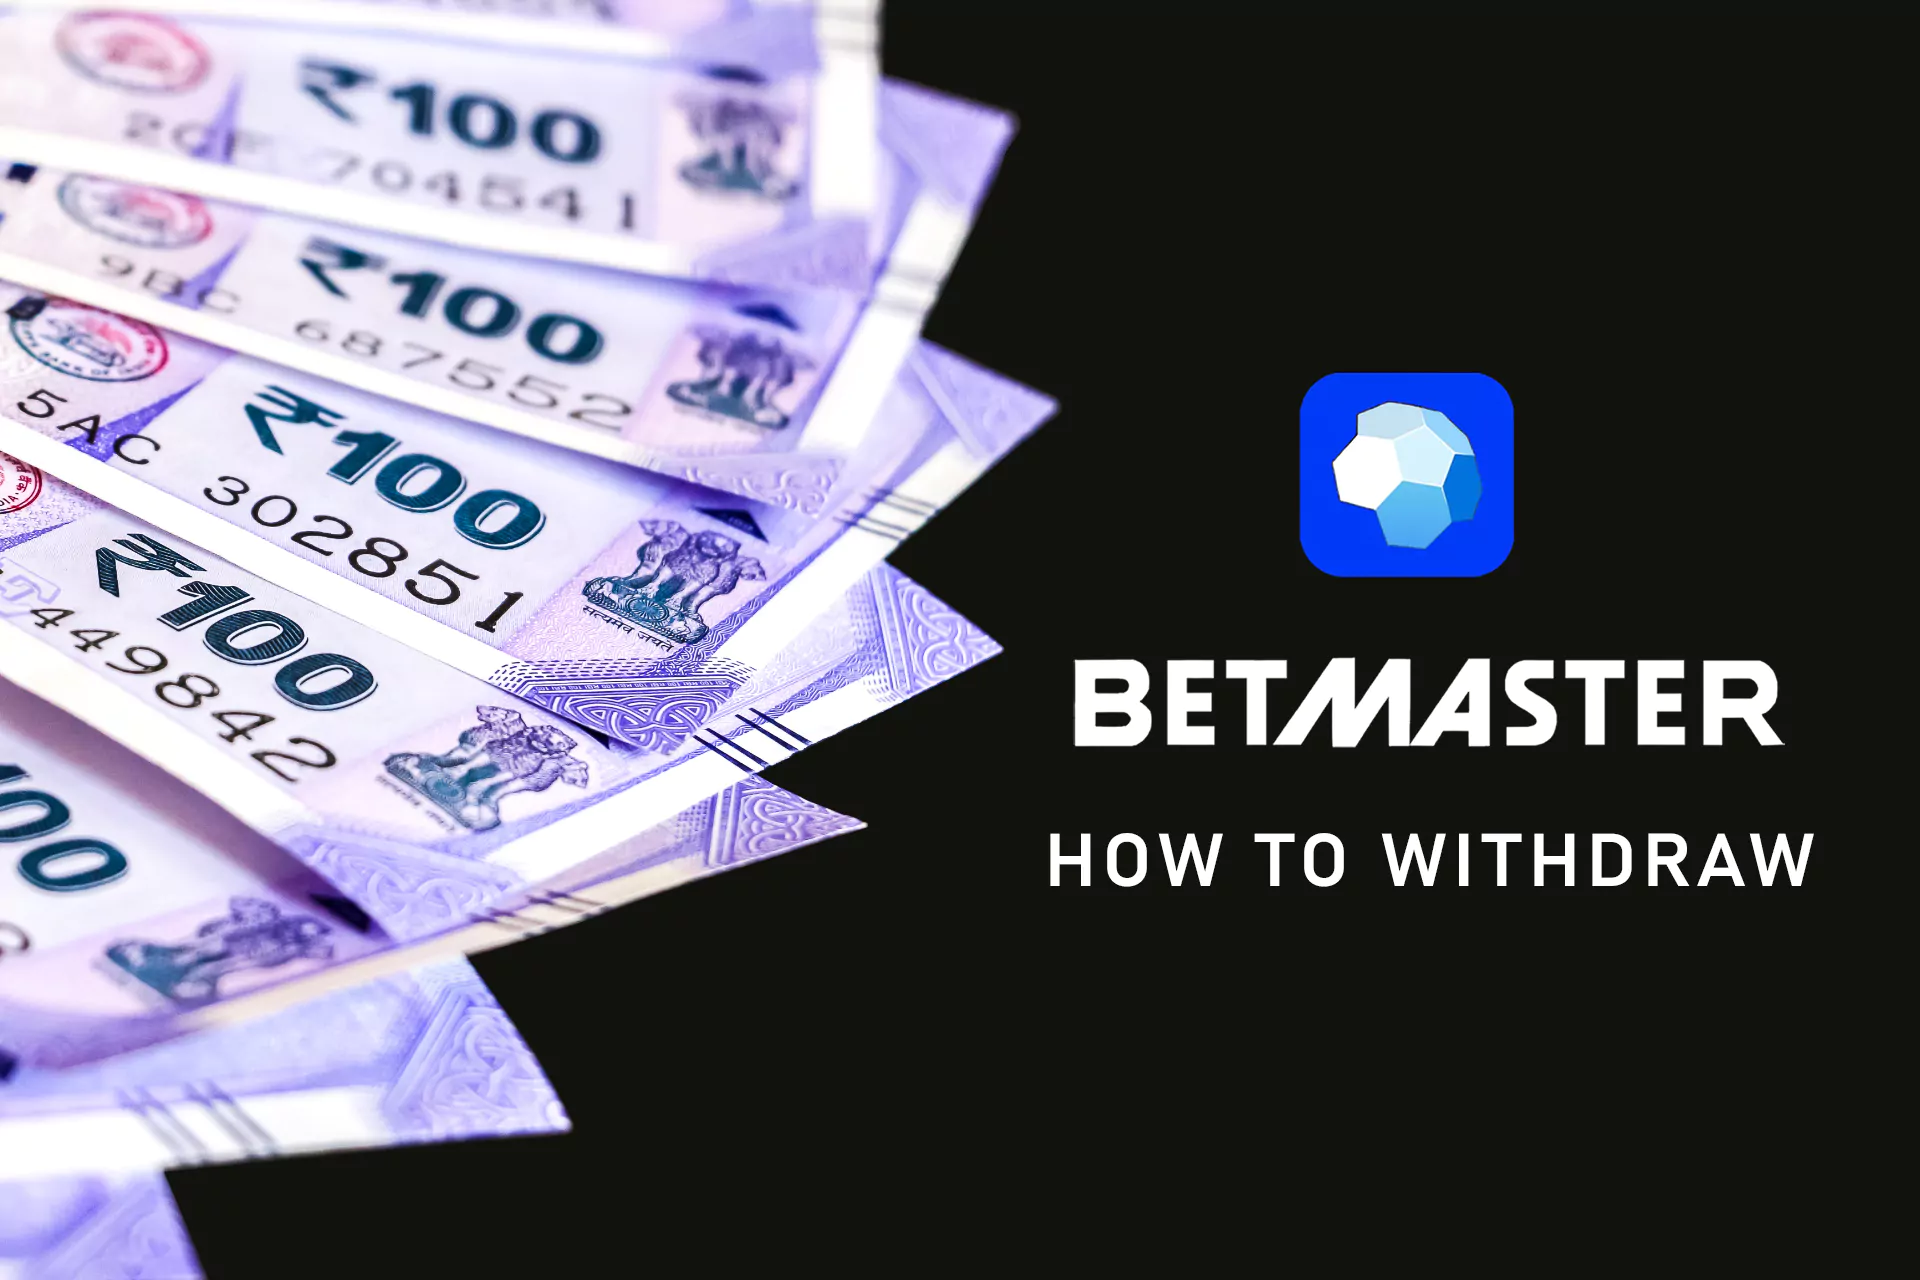 You can withdraw your winnings to the bank account or e-wallet directly.